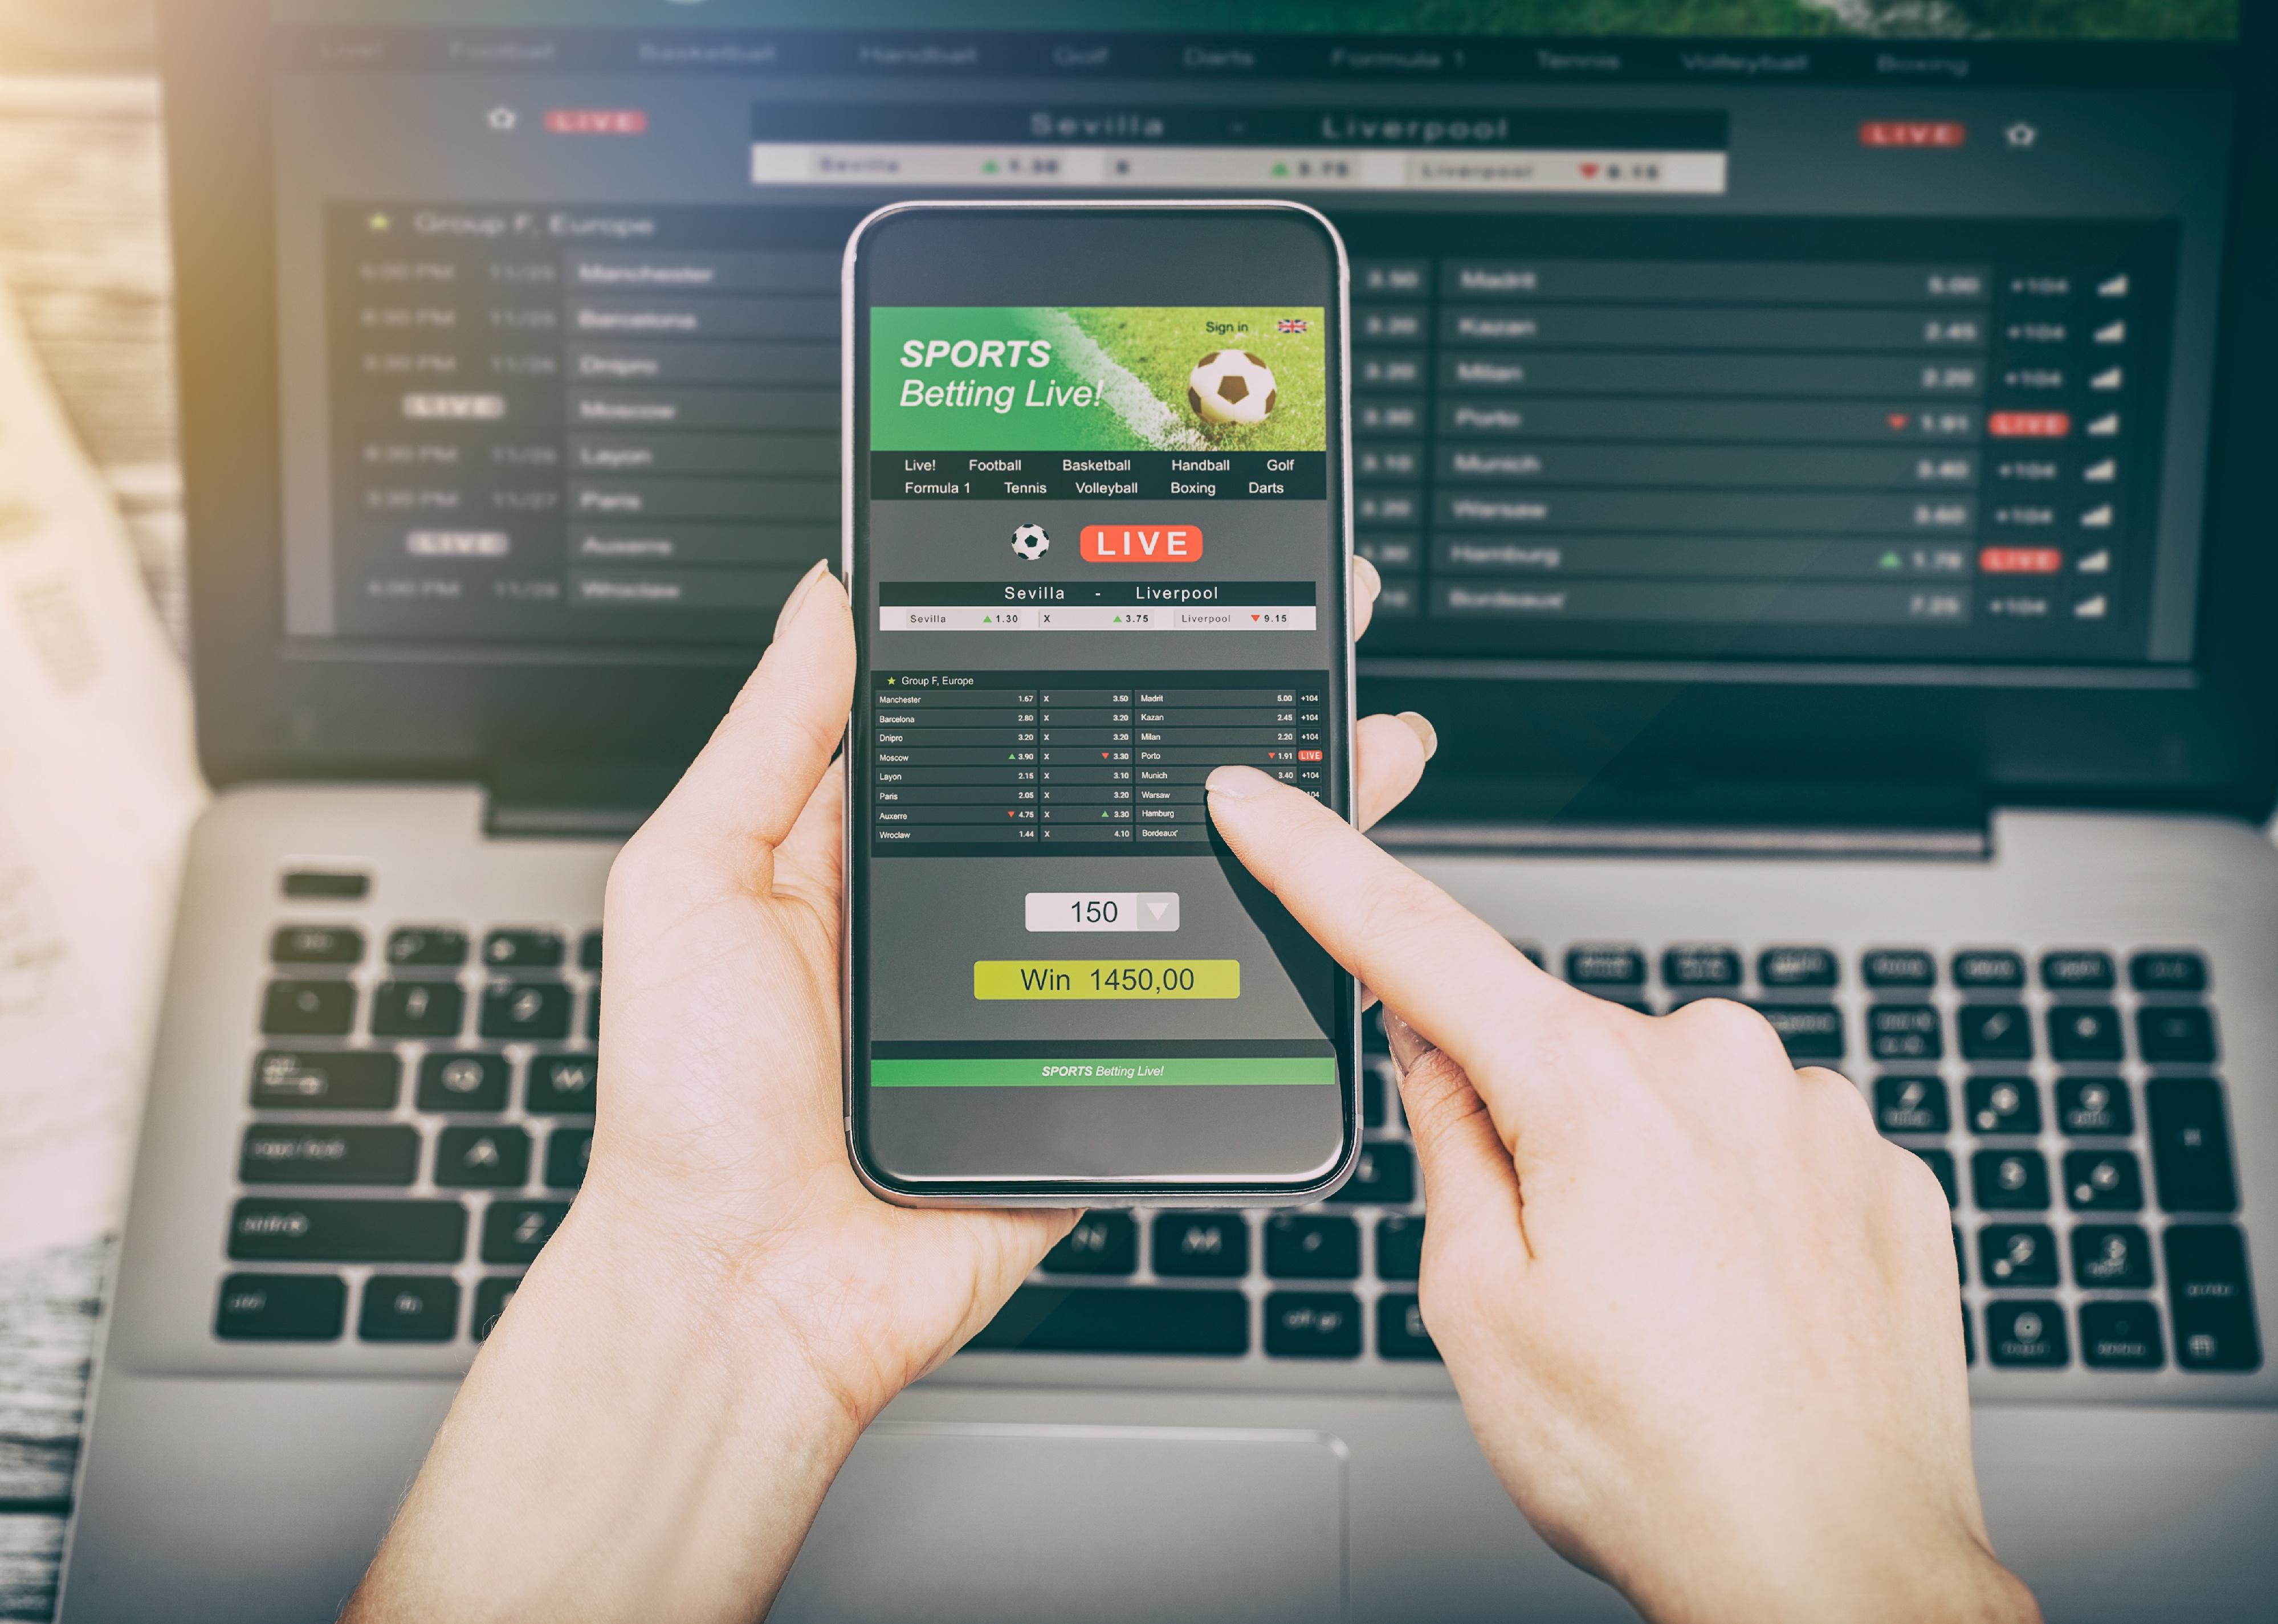 Hands on sports betting app.